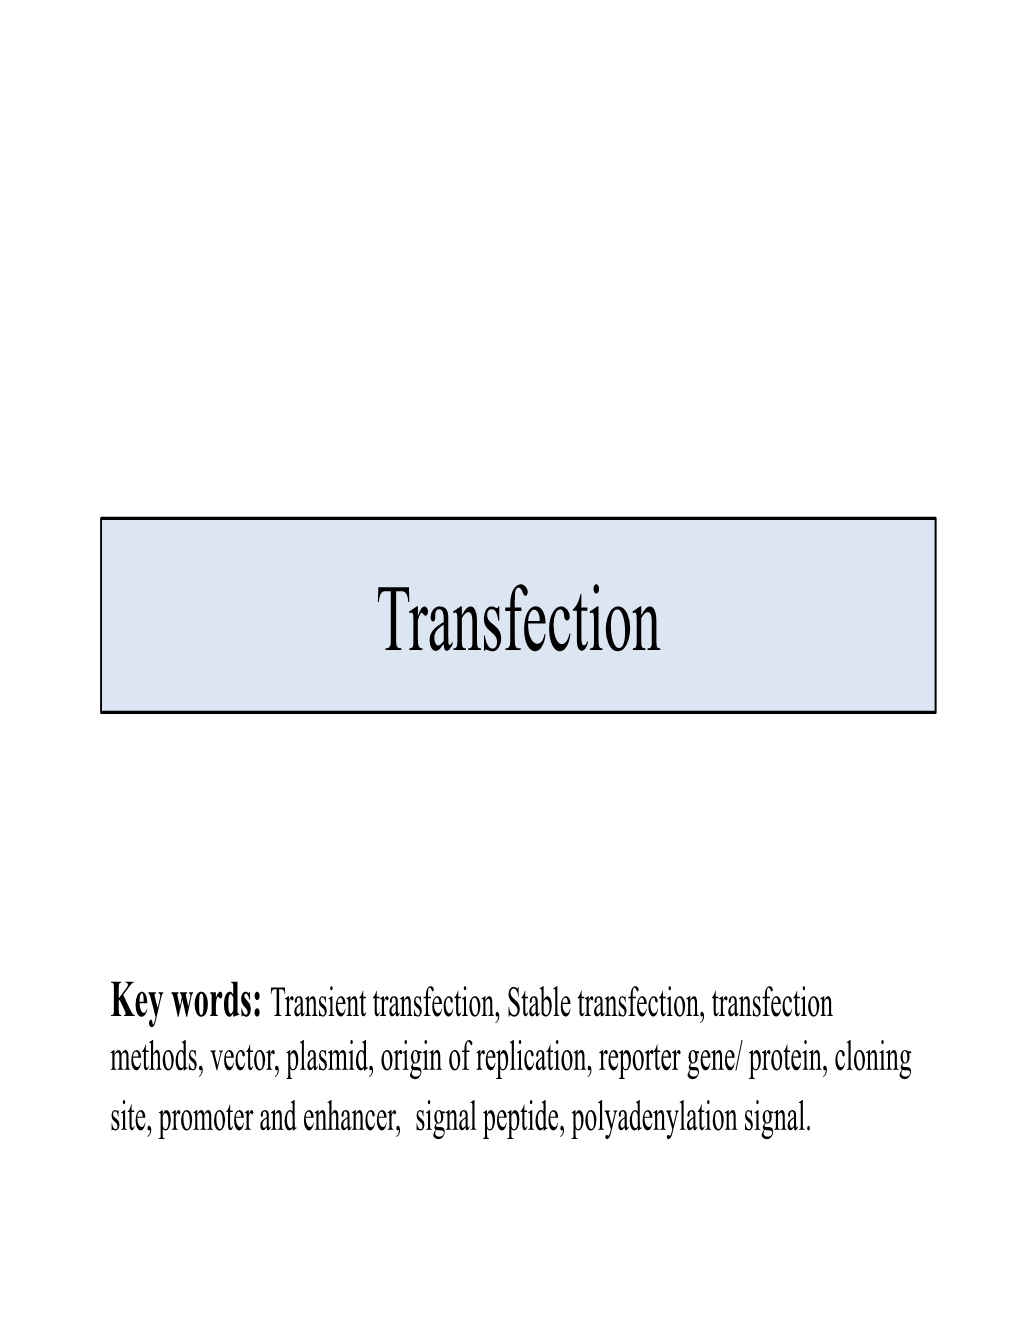 CHO Cell Transfection